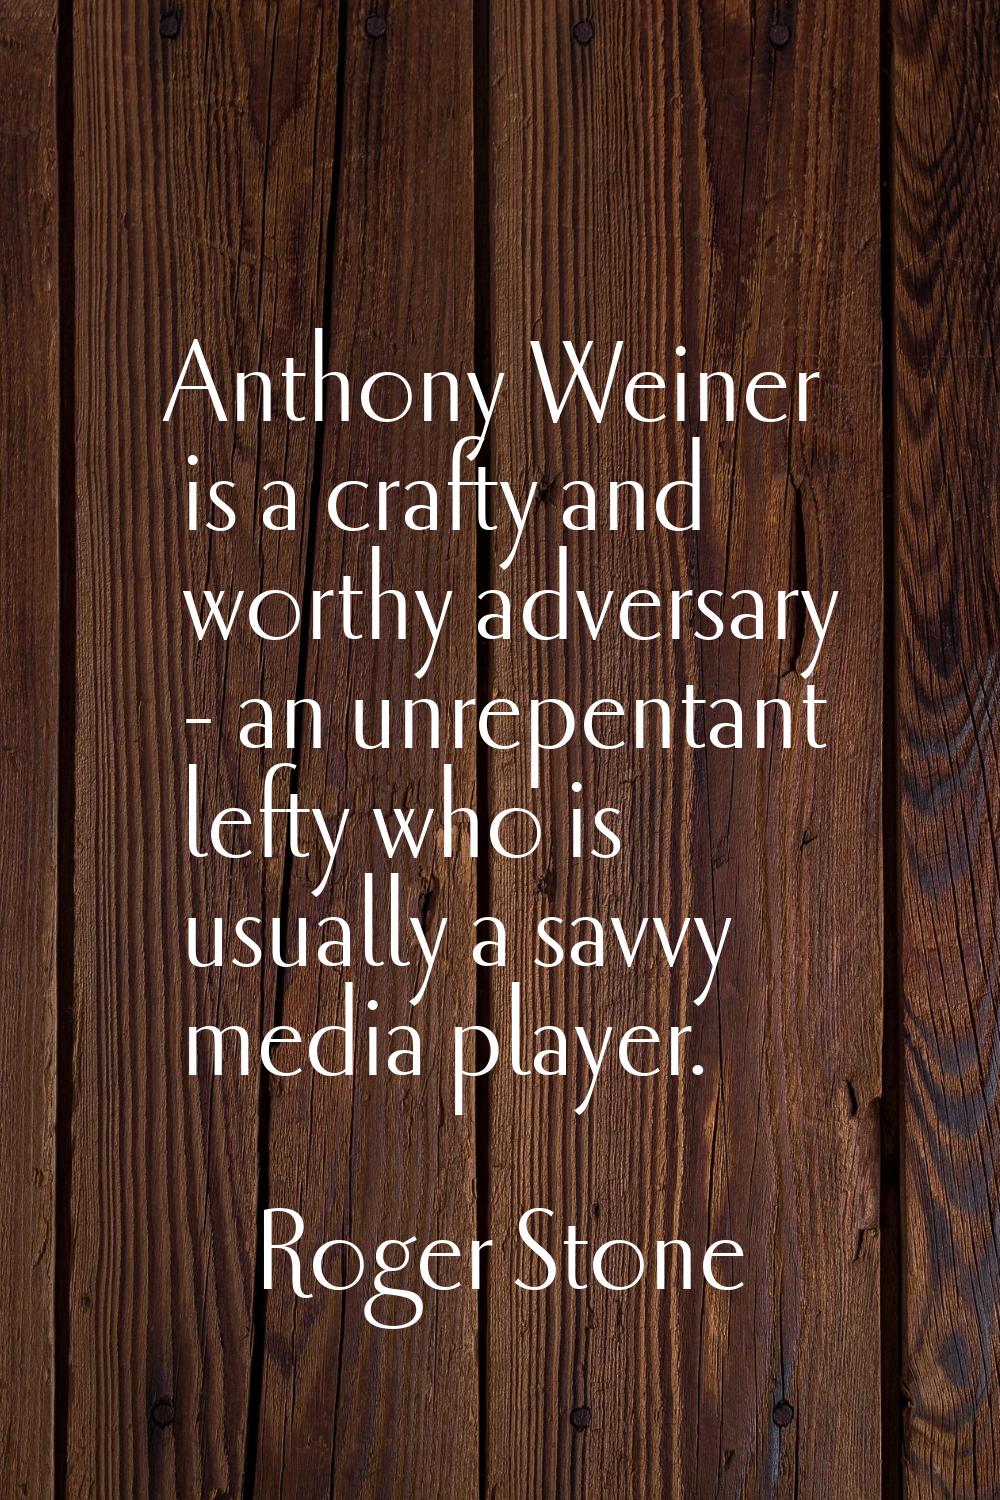 Anthony Weiner is a crafty and worthy adversary - an unrepentant lefty who is usually a savvy media